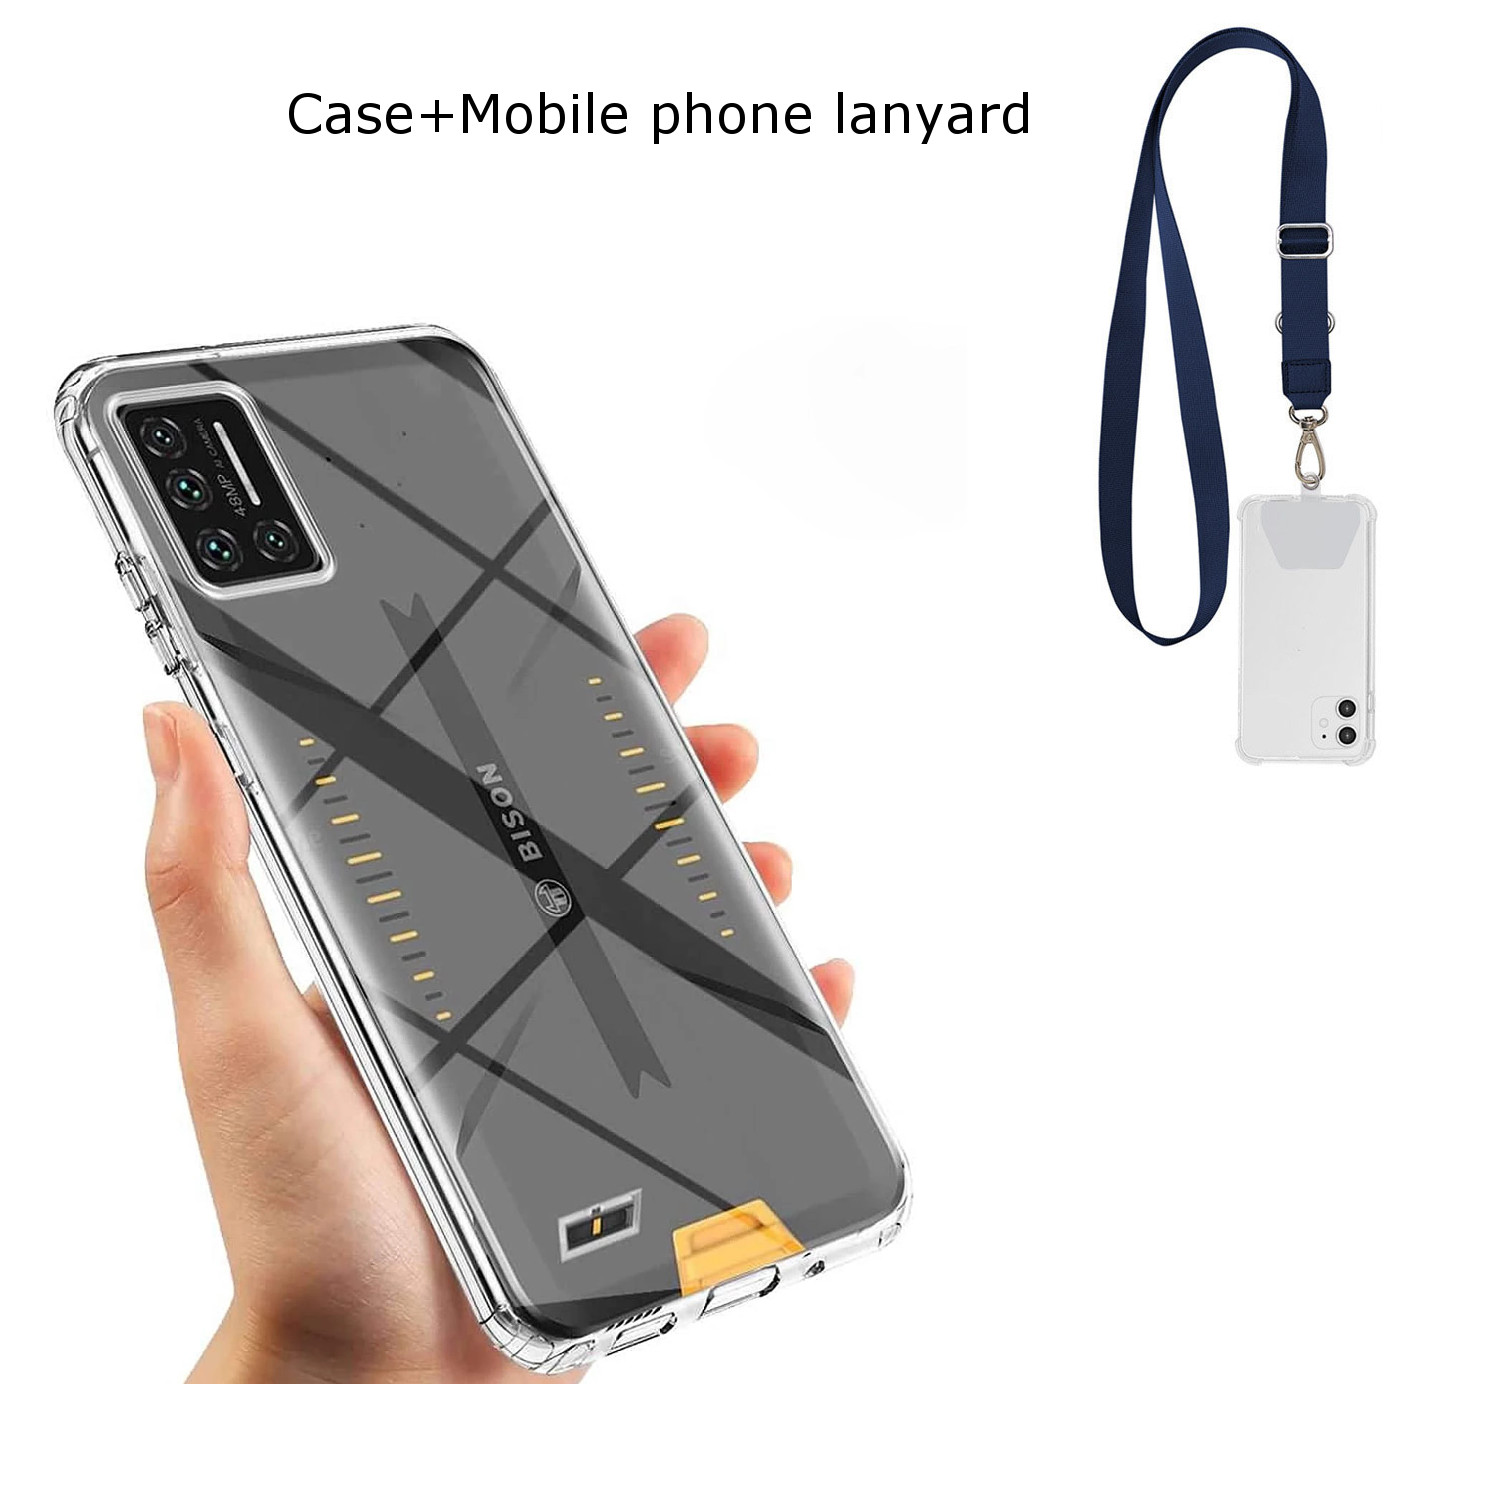 Bakeey-for-UMIDIGI-BISON-Global-Bands-Case-Crystal-Clear-Transparent-Ultra-Thin-Non-Yellow-Soft-TPU--1821060-14